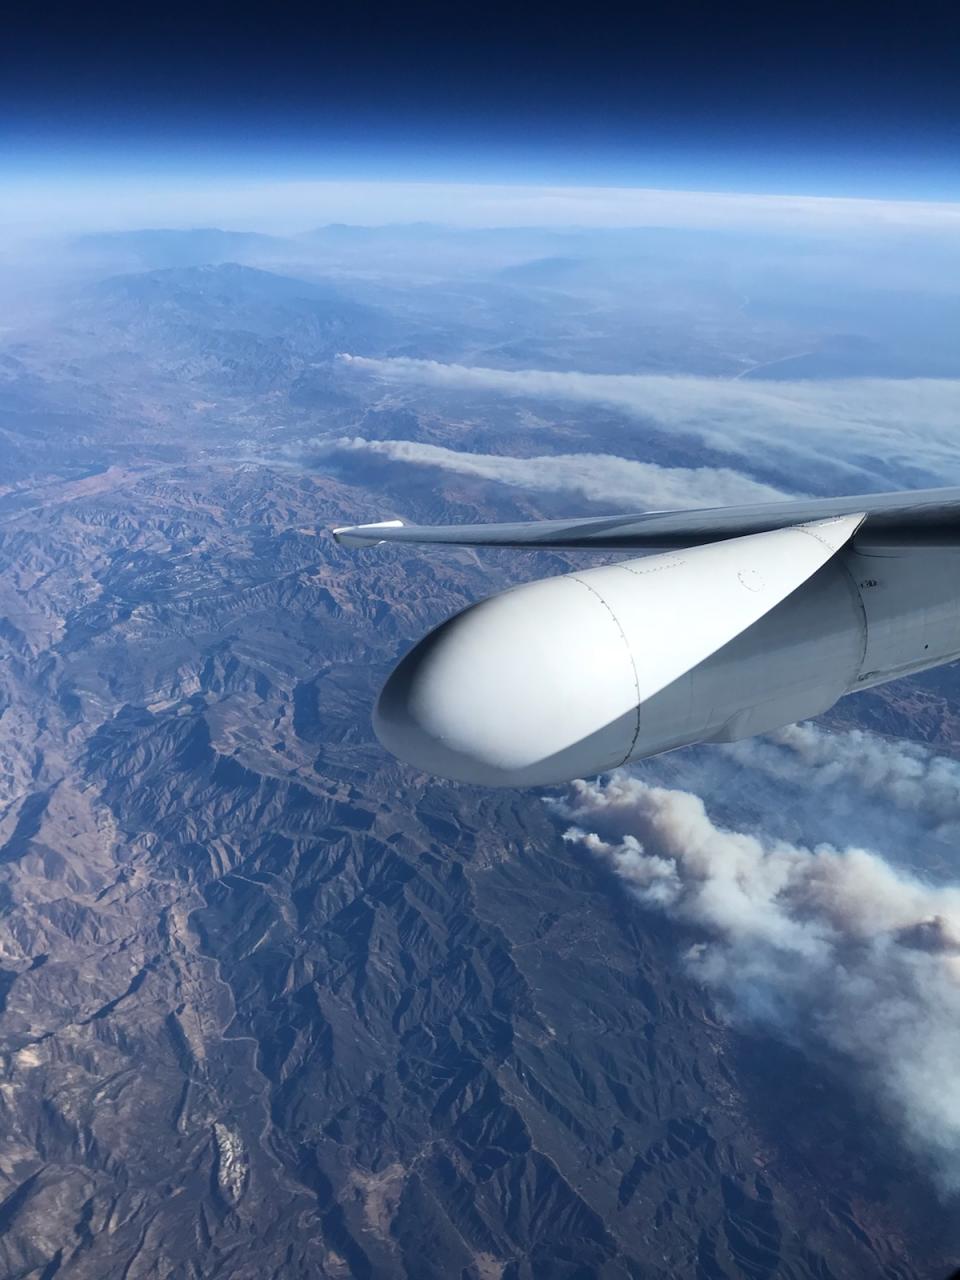 <p>A view from NASA Armstrong Flight Research Centerâs ER-2 aircraft shows smoke plumes, from roughly 65,000 feet, produced by the Thomas Fire in Ventura County, California, around 1 p.m. PST on Dec. 5, 2017. (Photo: NASA/Stu Broce) </p>